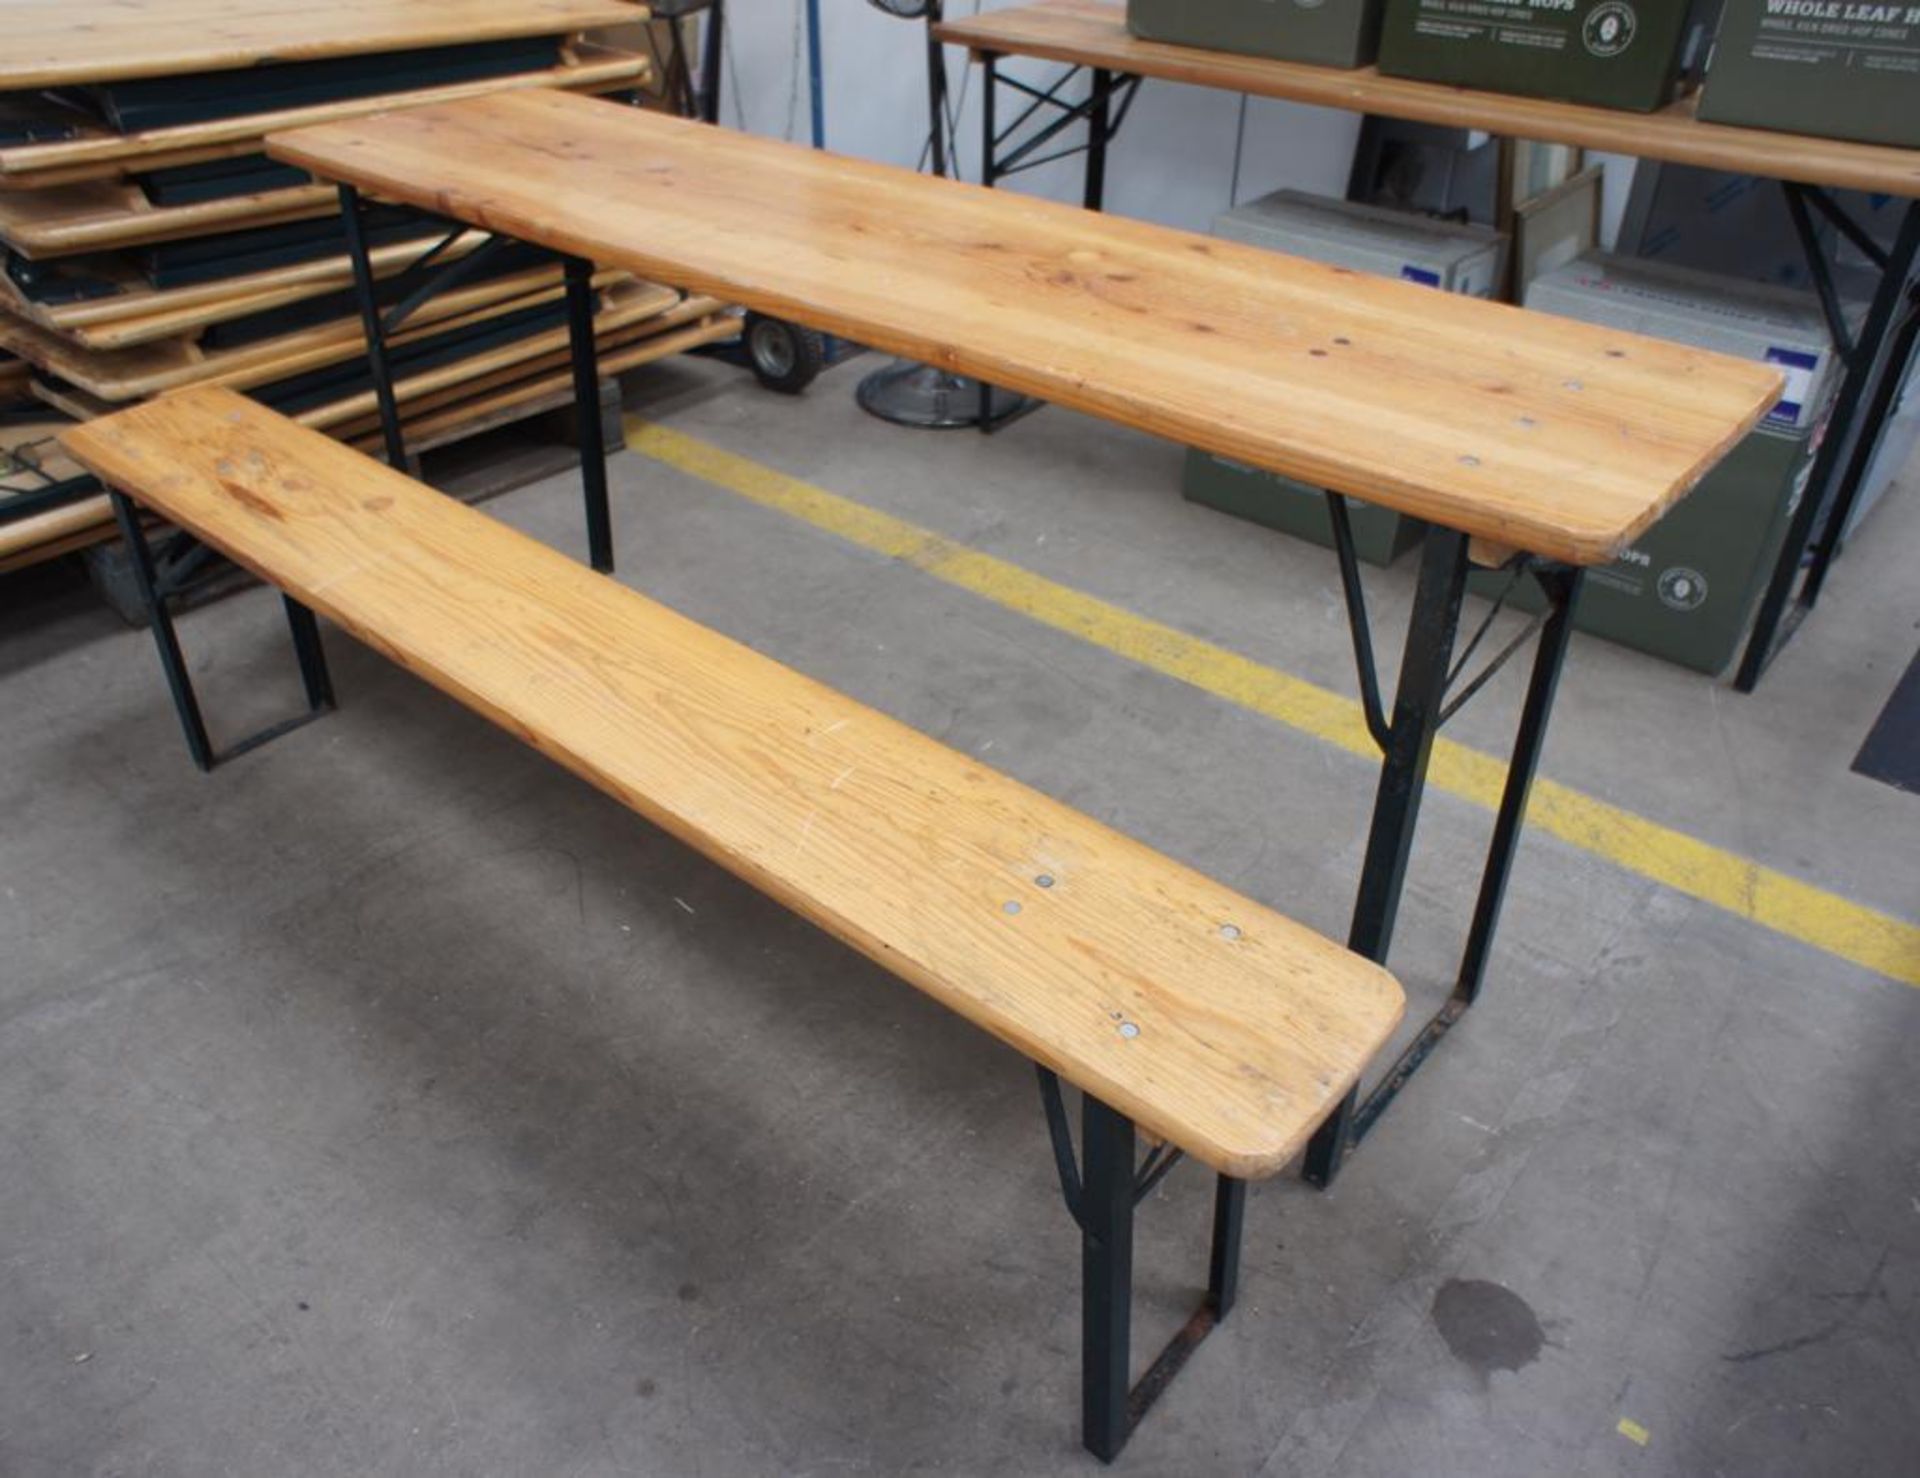 Pine Effect Foldaway Table 1760 x 460 with 1 x Pine Effect Foldaway Bench 1760 x 230mm - Image 2 of 2